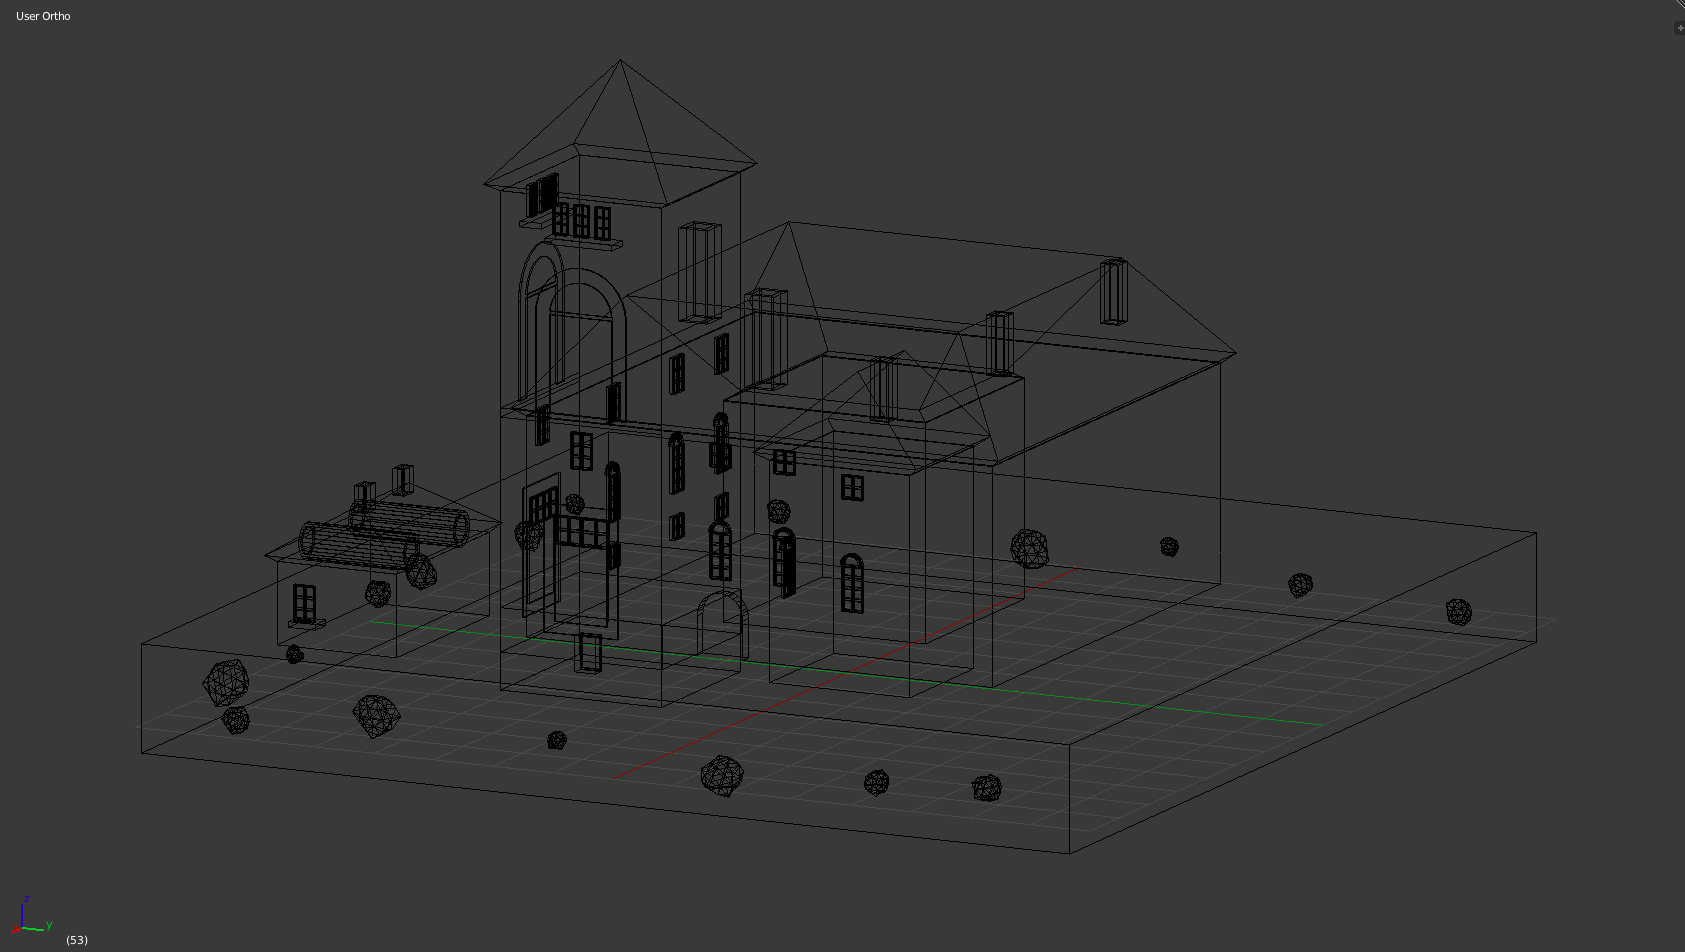 A 3 dimensional model of the Ventspils Livonian Order Castle with object shapes outlined